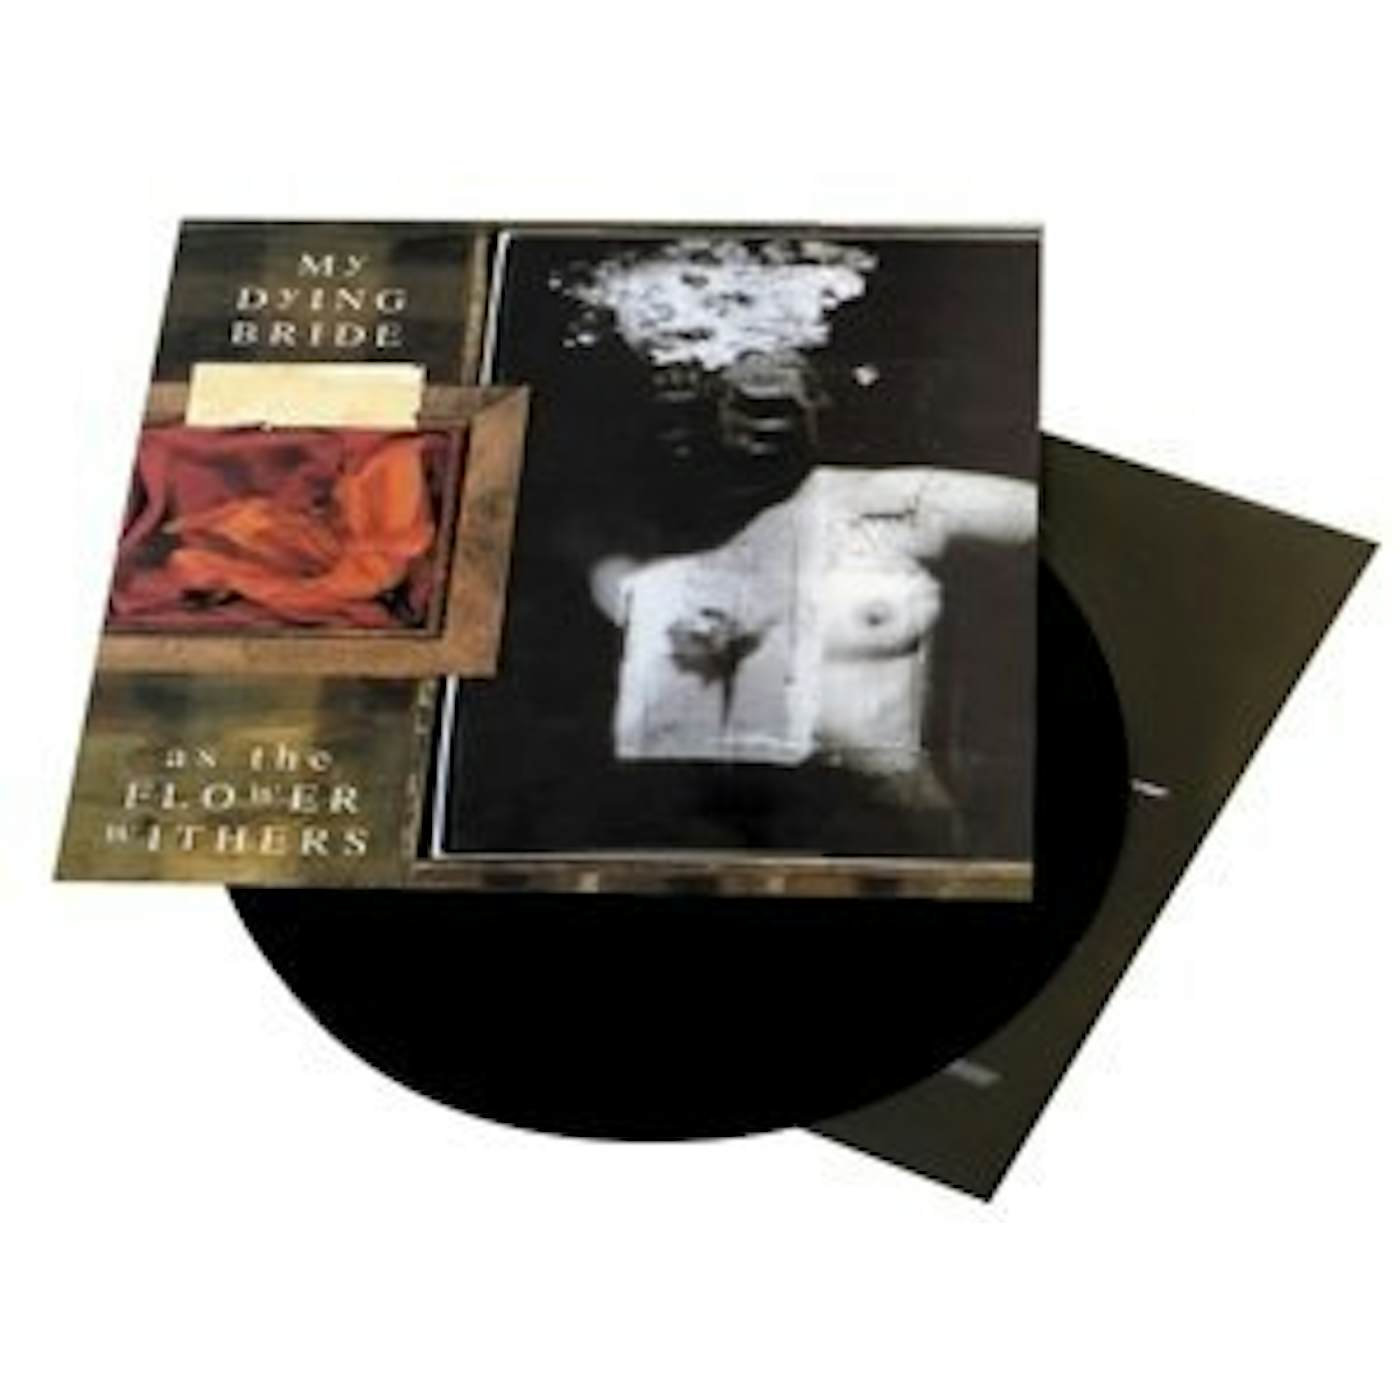 My Dying Bride As The Flower Withers Vinyl Record